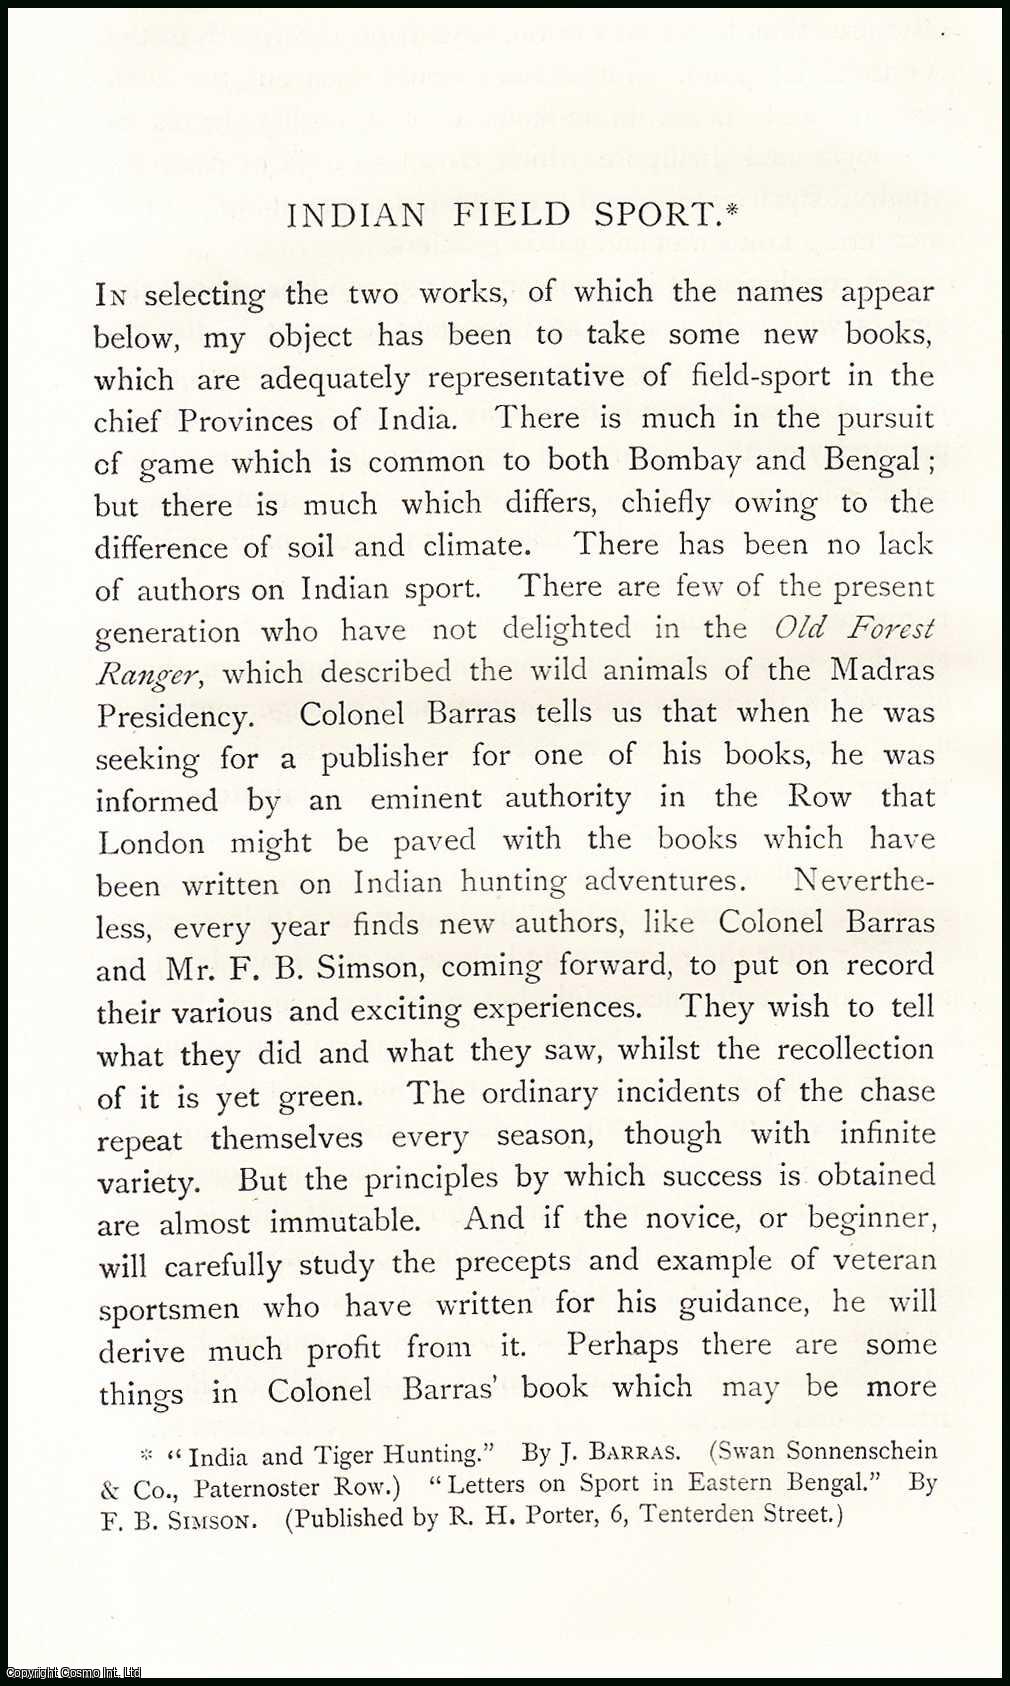 C.T. Buckland - Hunting : Indian Field Sport. An uncommon original article from The Asiatic Quarterly Review, 1887.